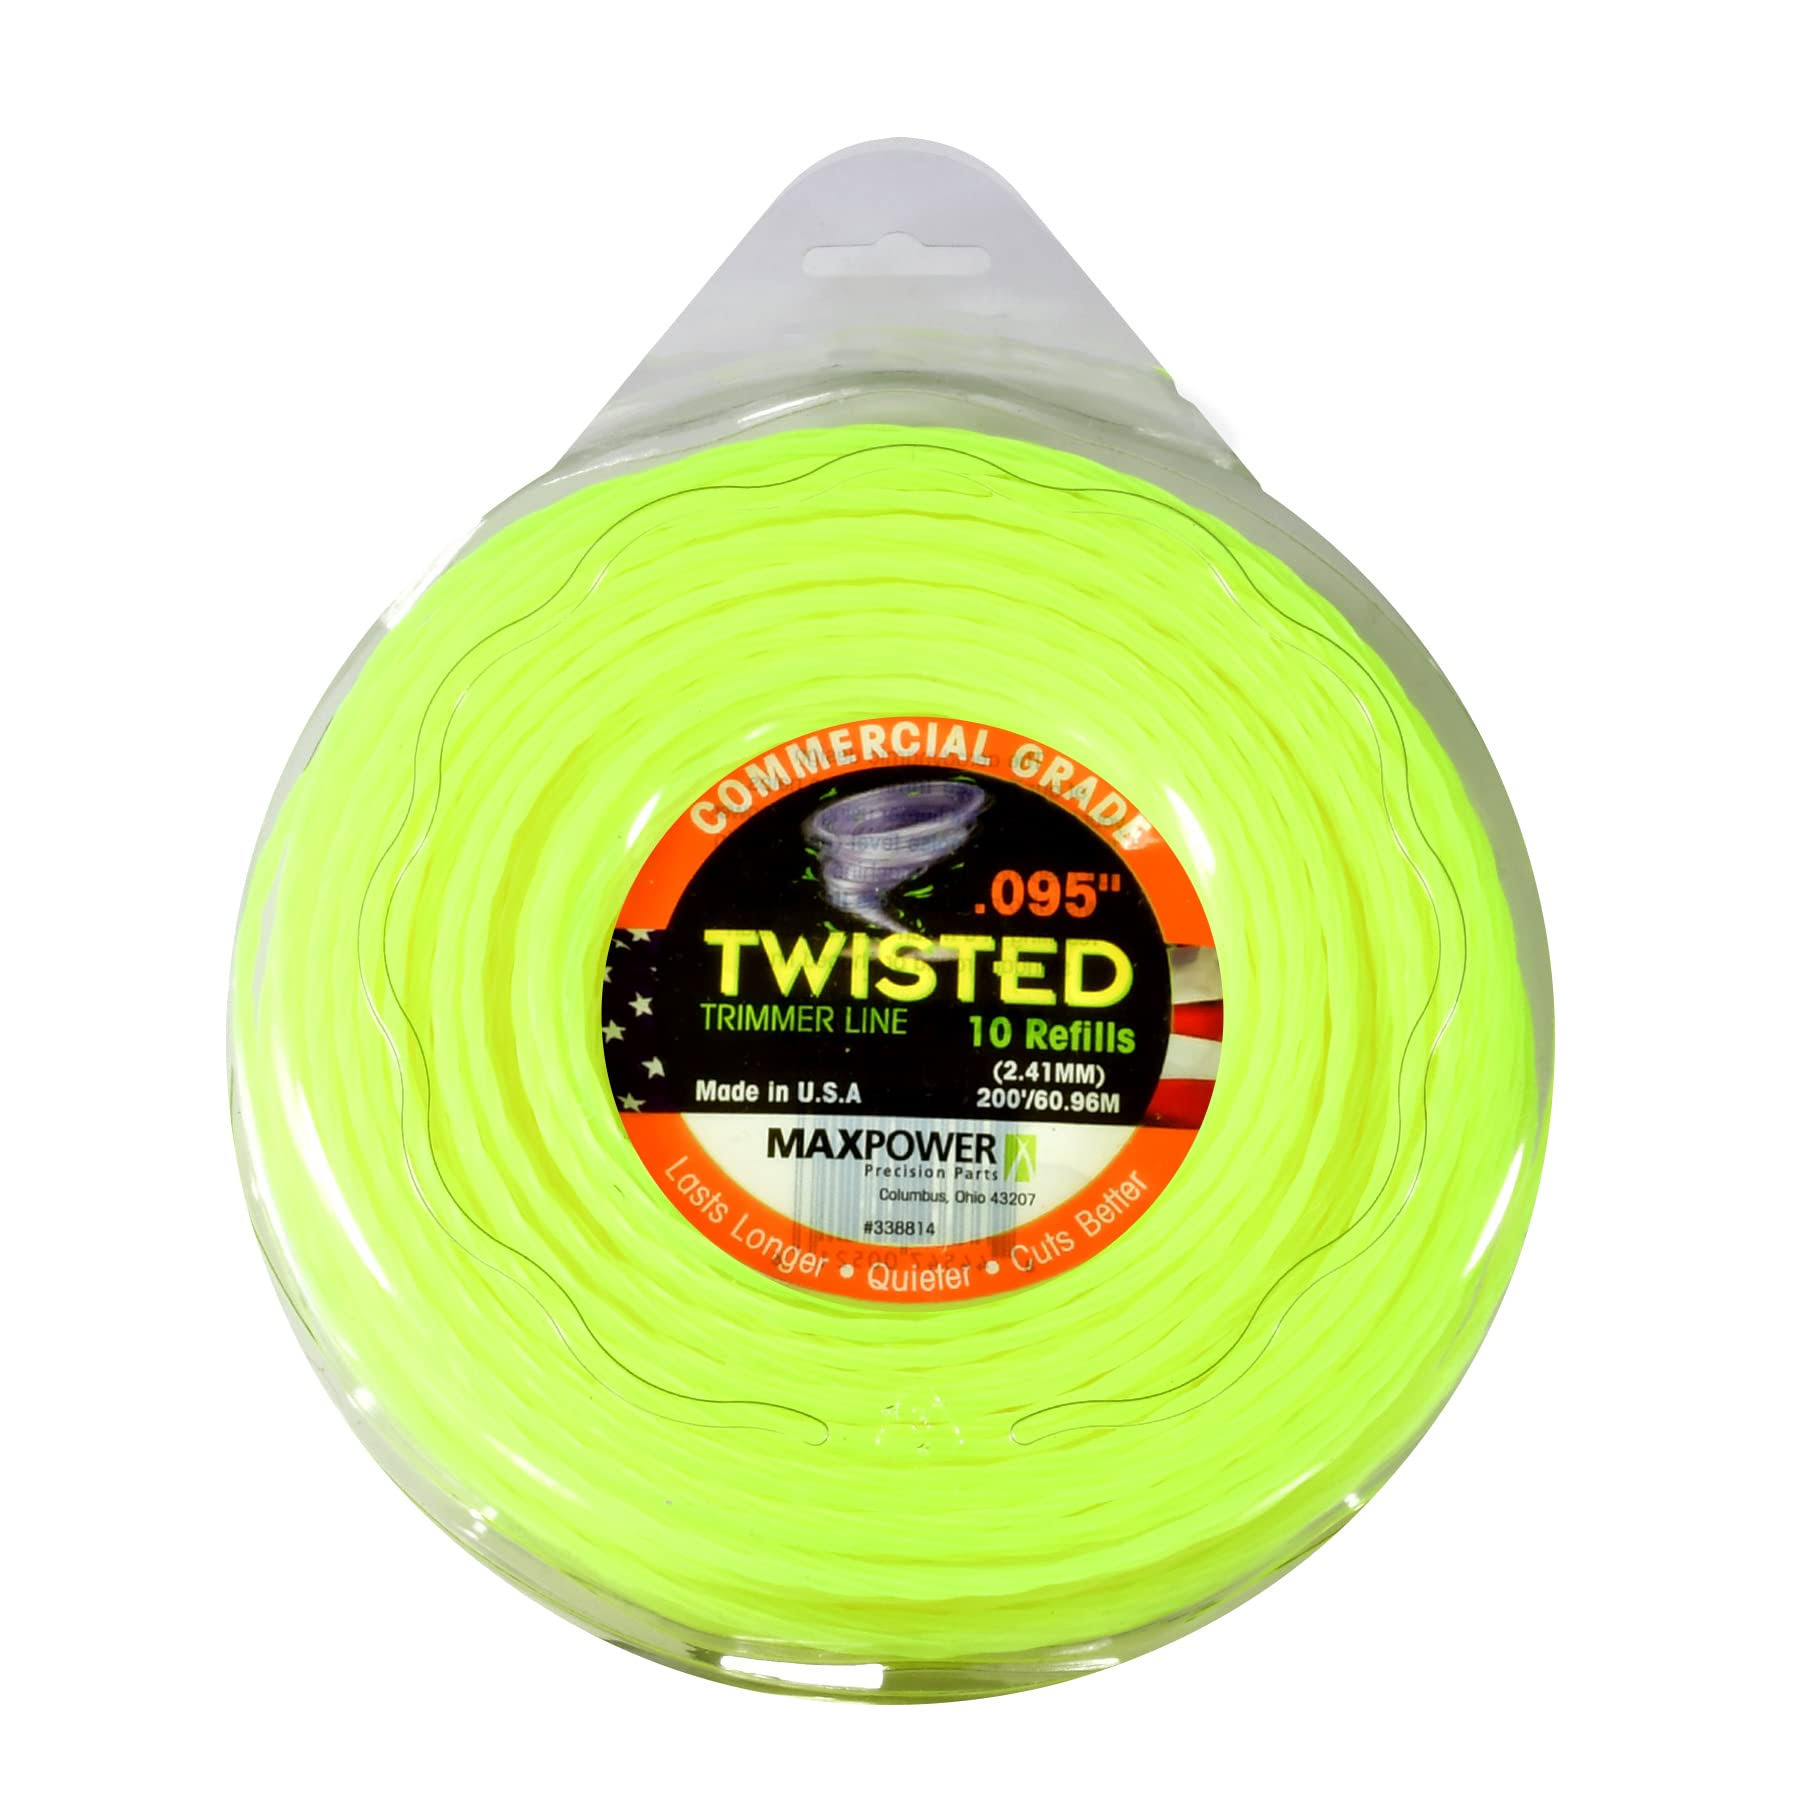 Maxpower 338814 Premium Twisted Trimmer Line - 0.095" Twisted Trimmer Line, 200' Length